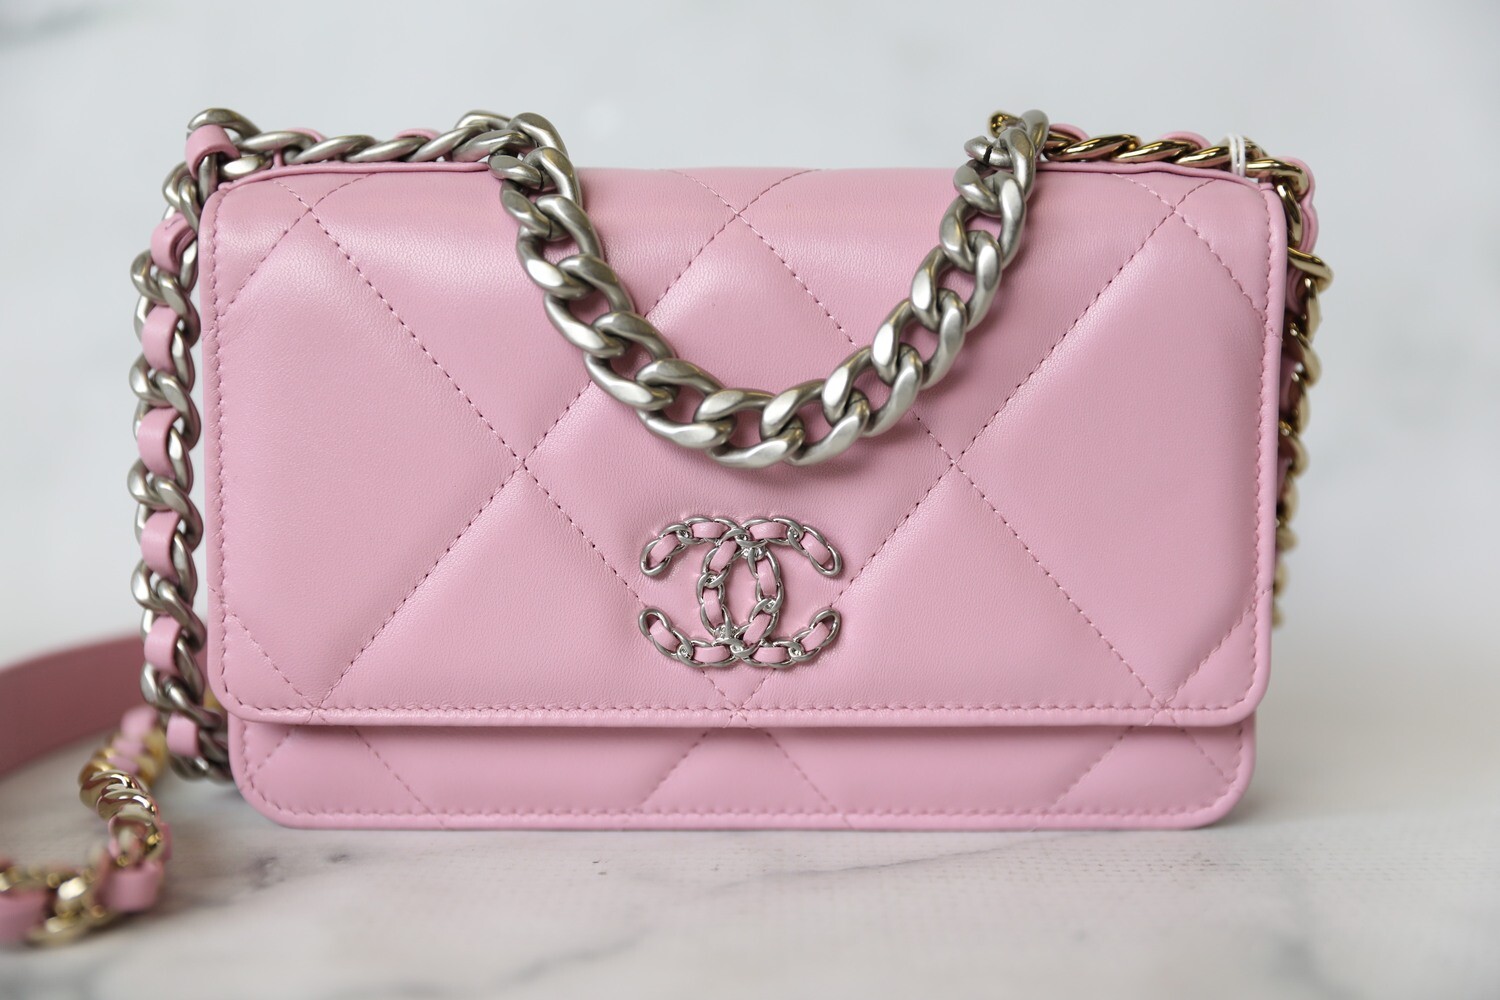 Chanel 19 Wallet on Chain, Pink Lambskin Leather, Preowned in Box WA001